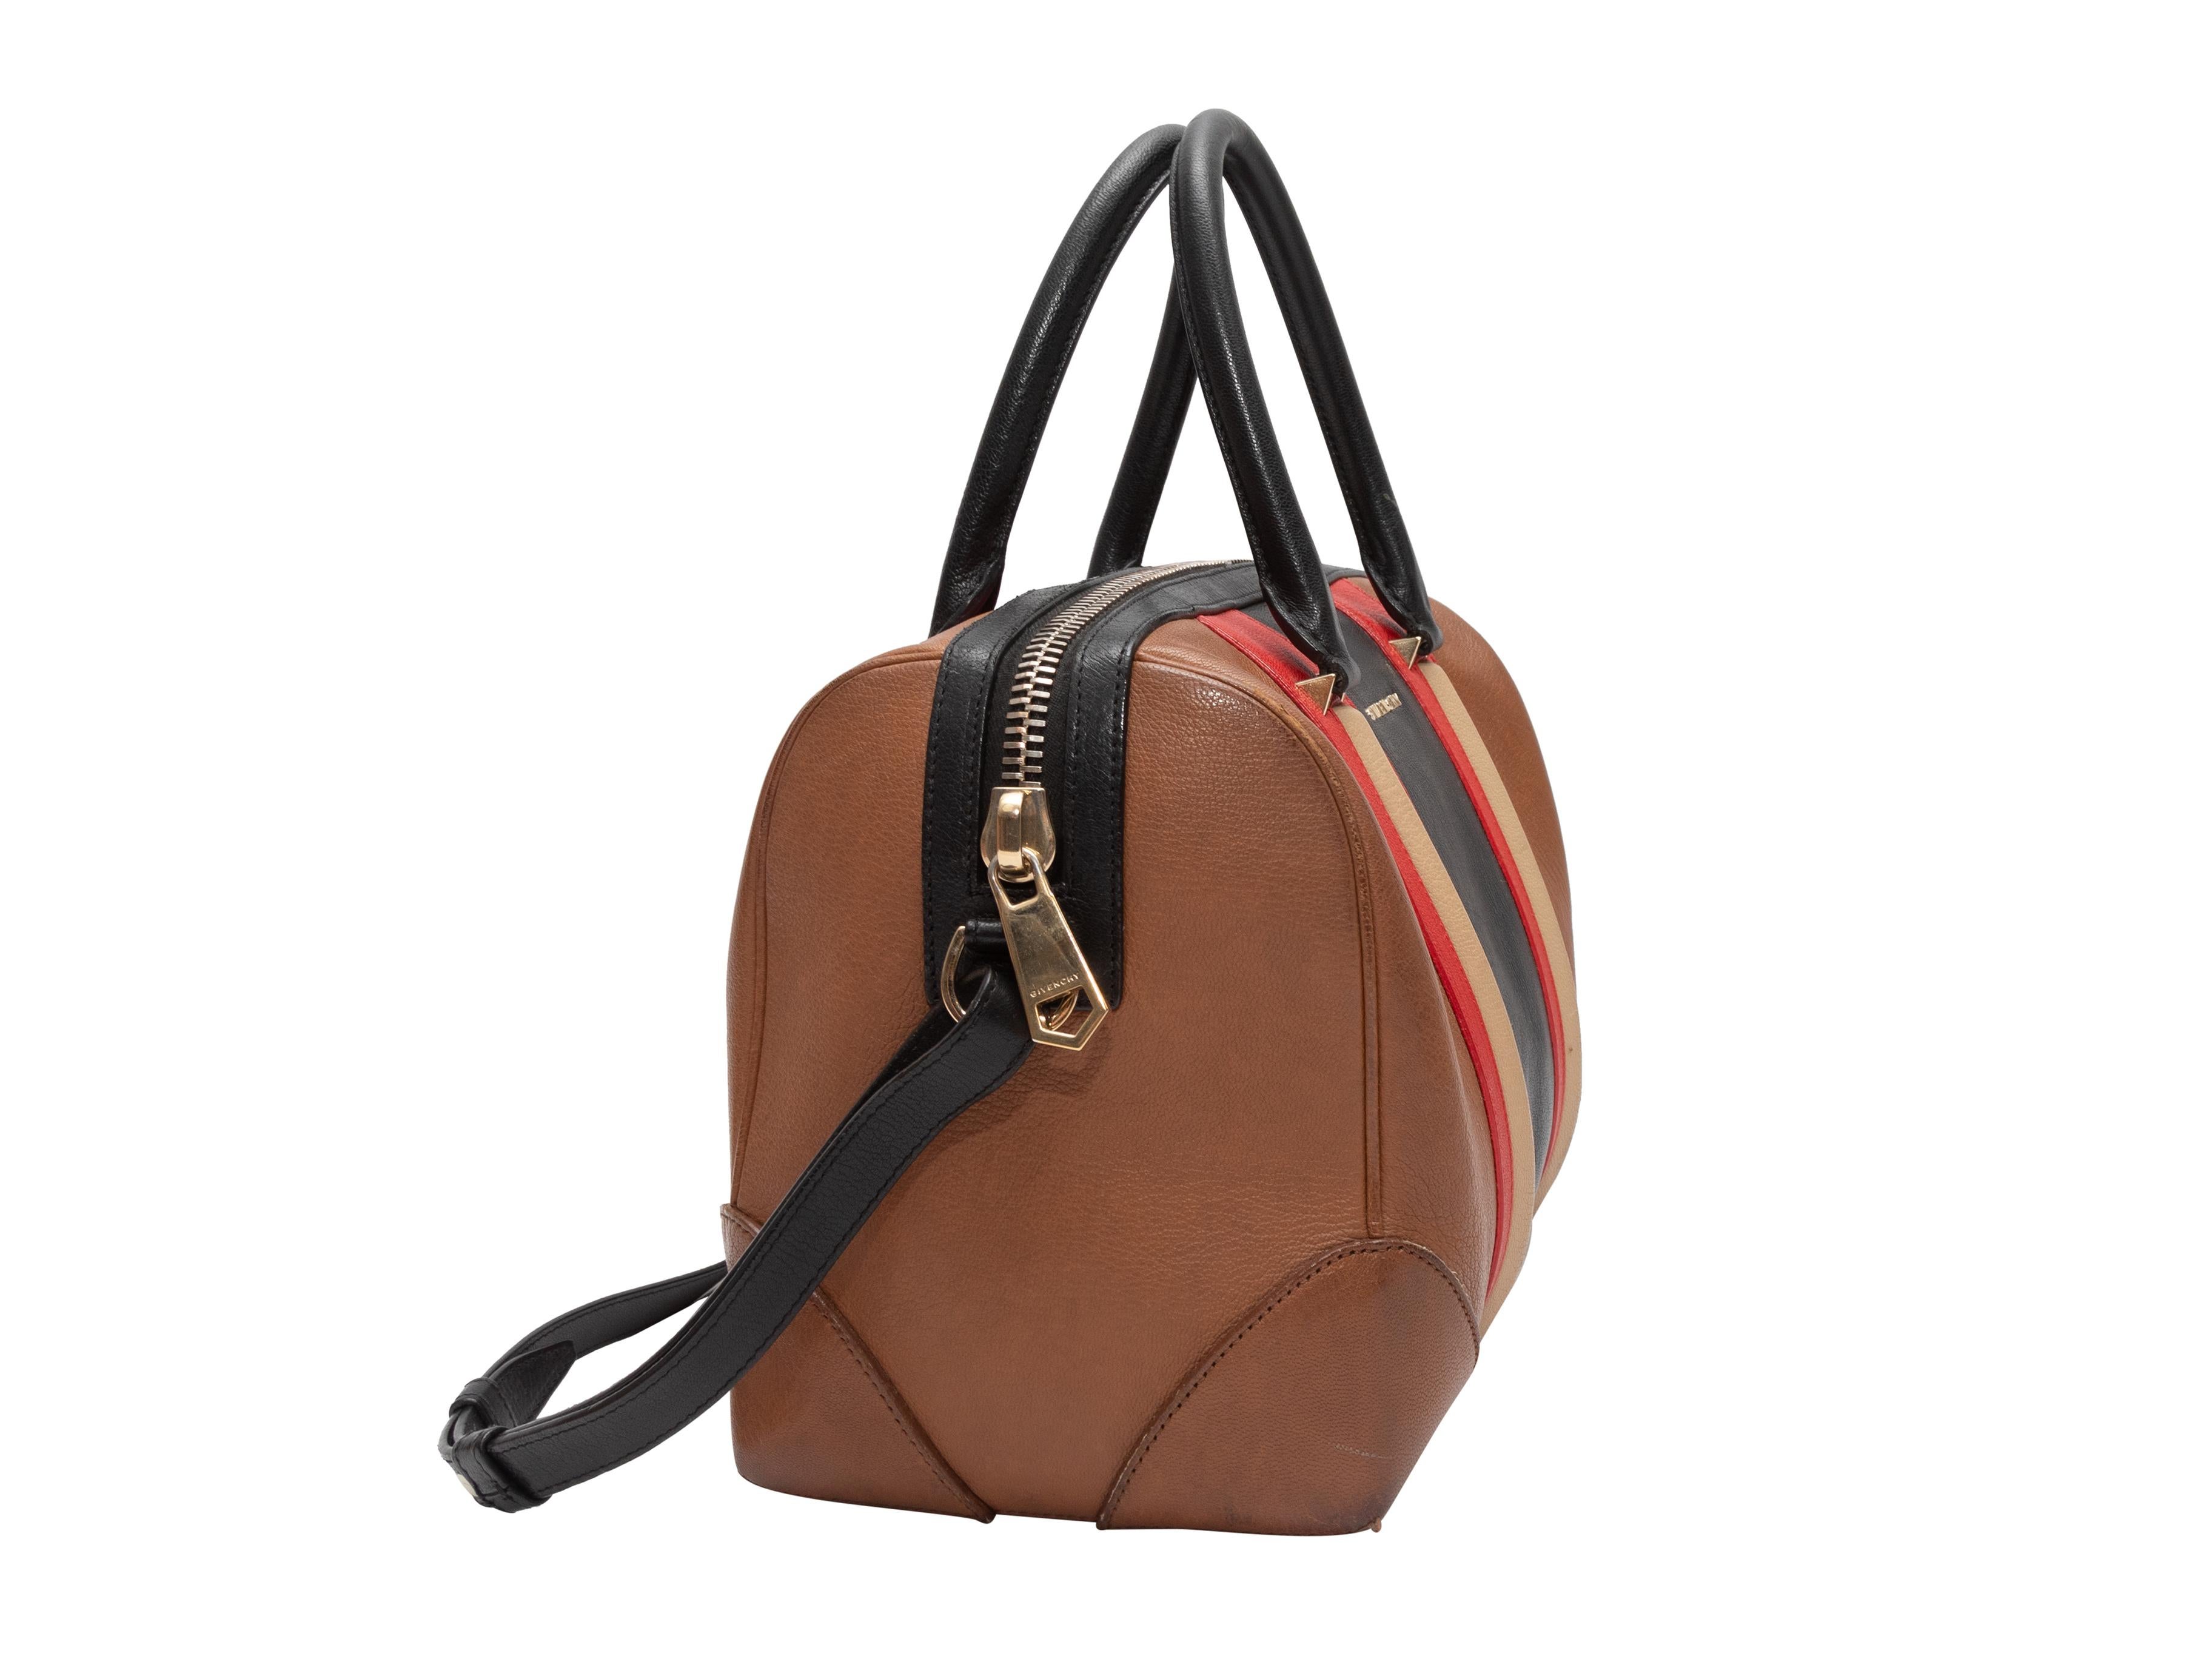 Tan & Multicolor Givenchy Lucrezia Leather Satchel. The Lucrezia Bag features leather body, silver-tone hardware, dual rolled top handles, a single flat shoulder strap, and a top zip closure. 11.5